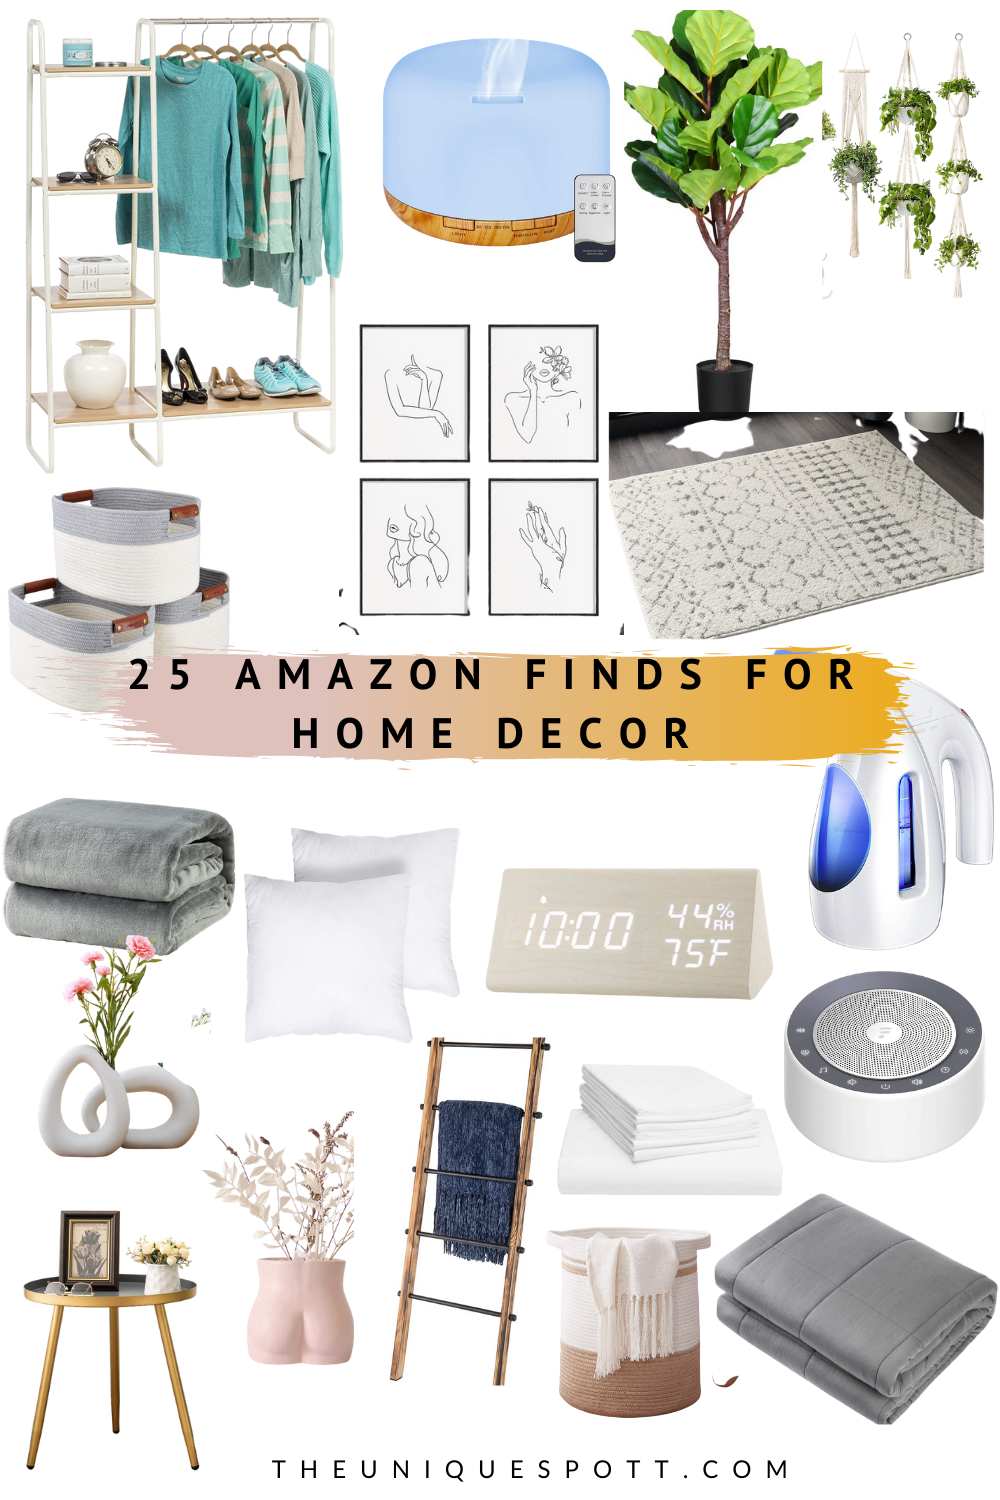 26 Greatest Amazon Finds For Home Decor You Will Love